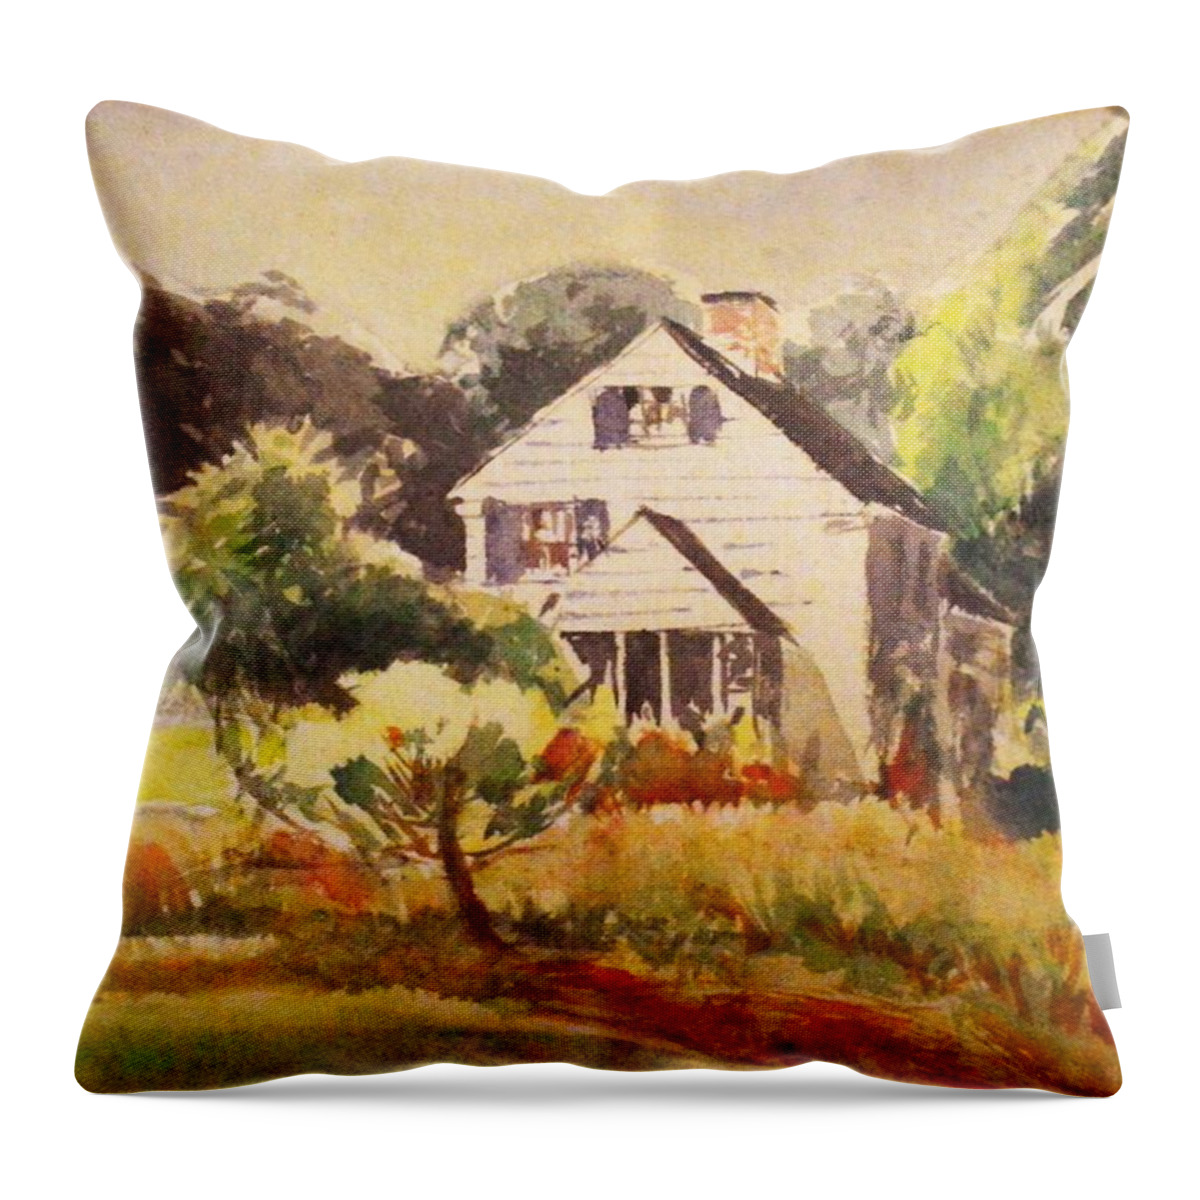 Watercolor Throw Pillow featuring the painting The Abandoned farmhouse by Stacie Siemsen